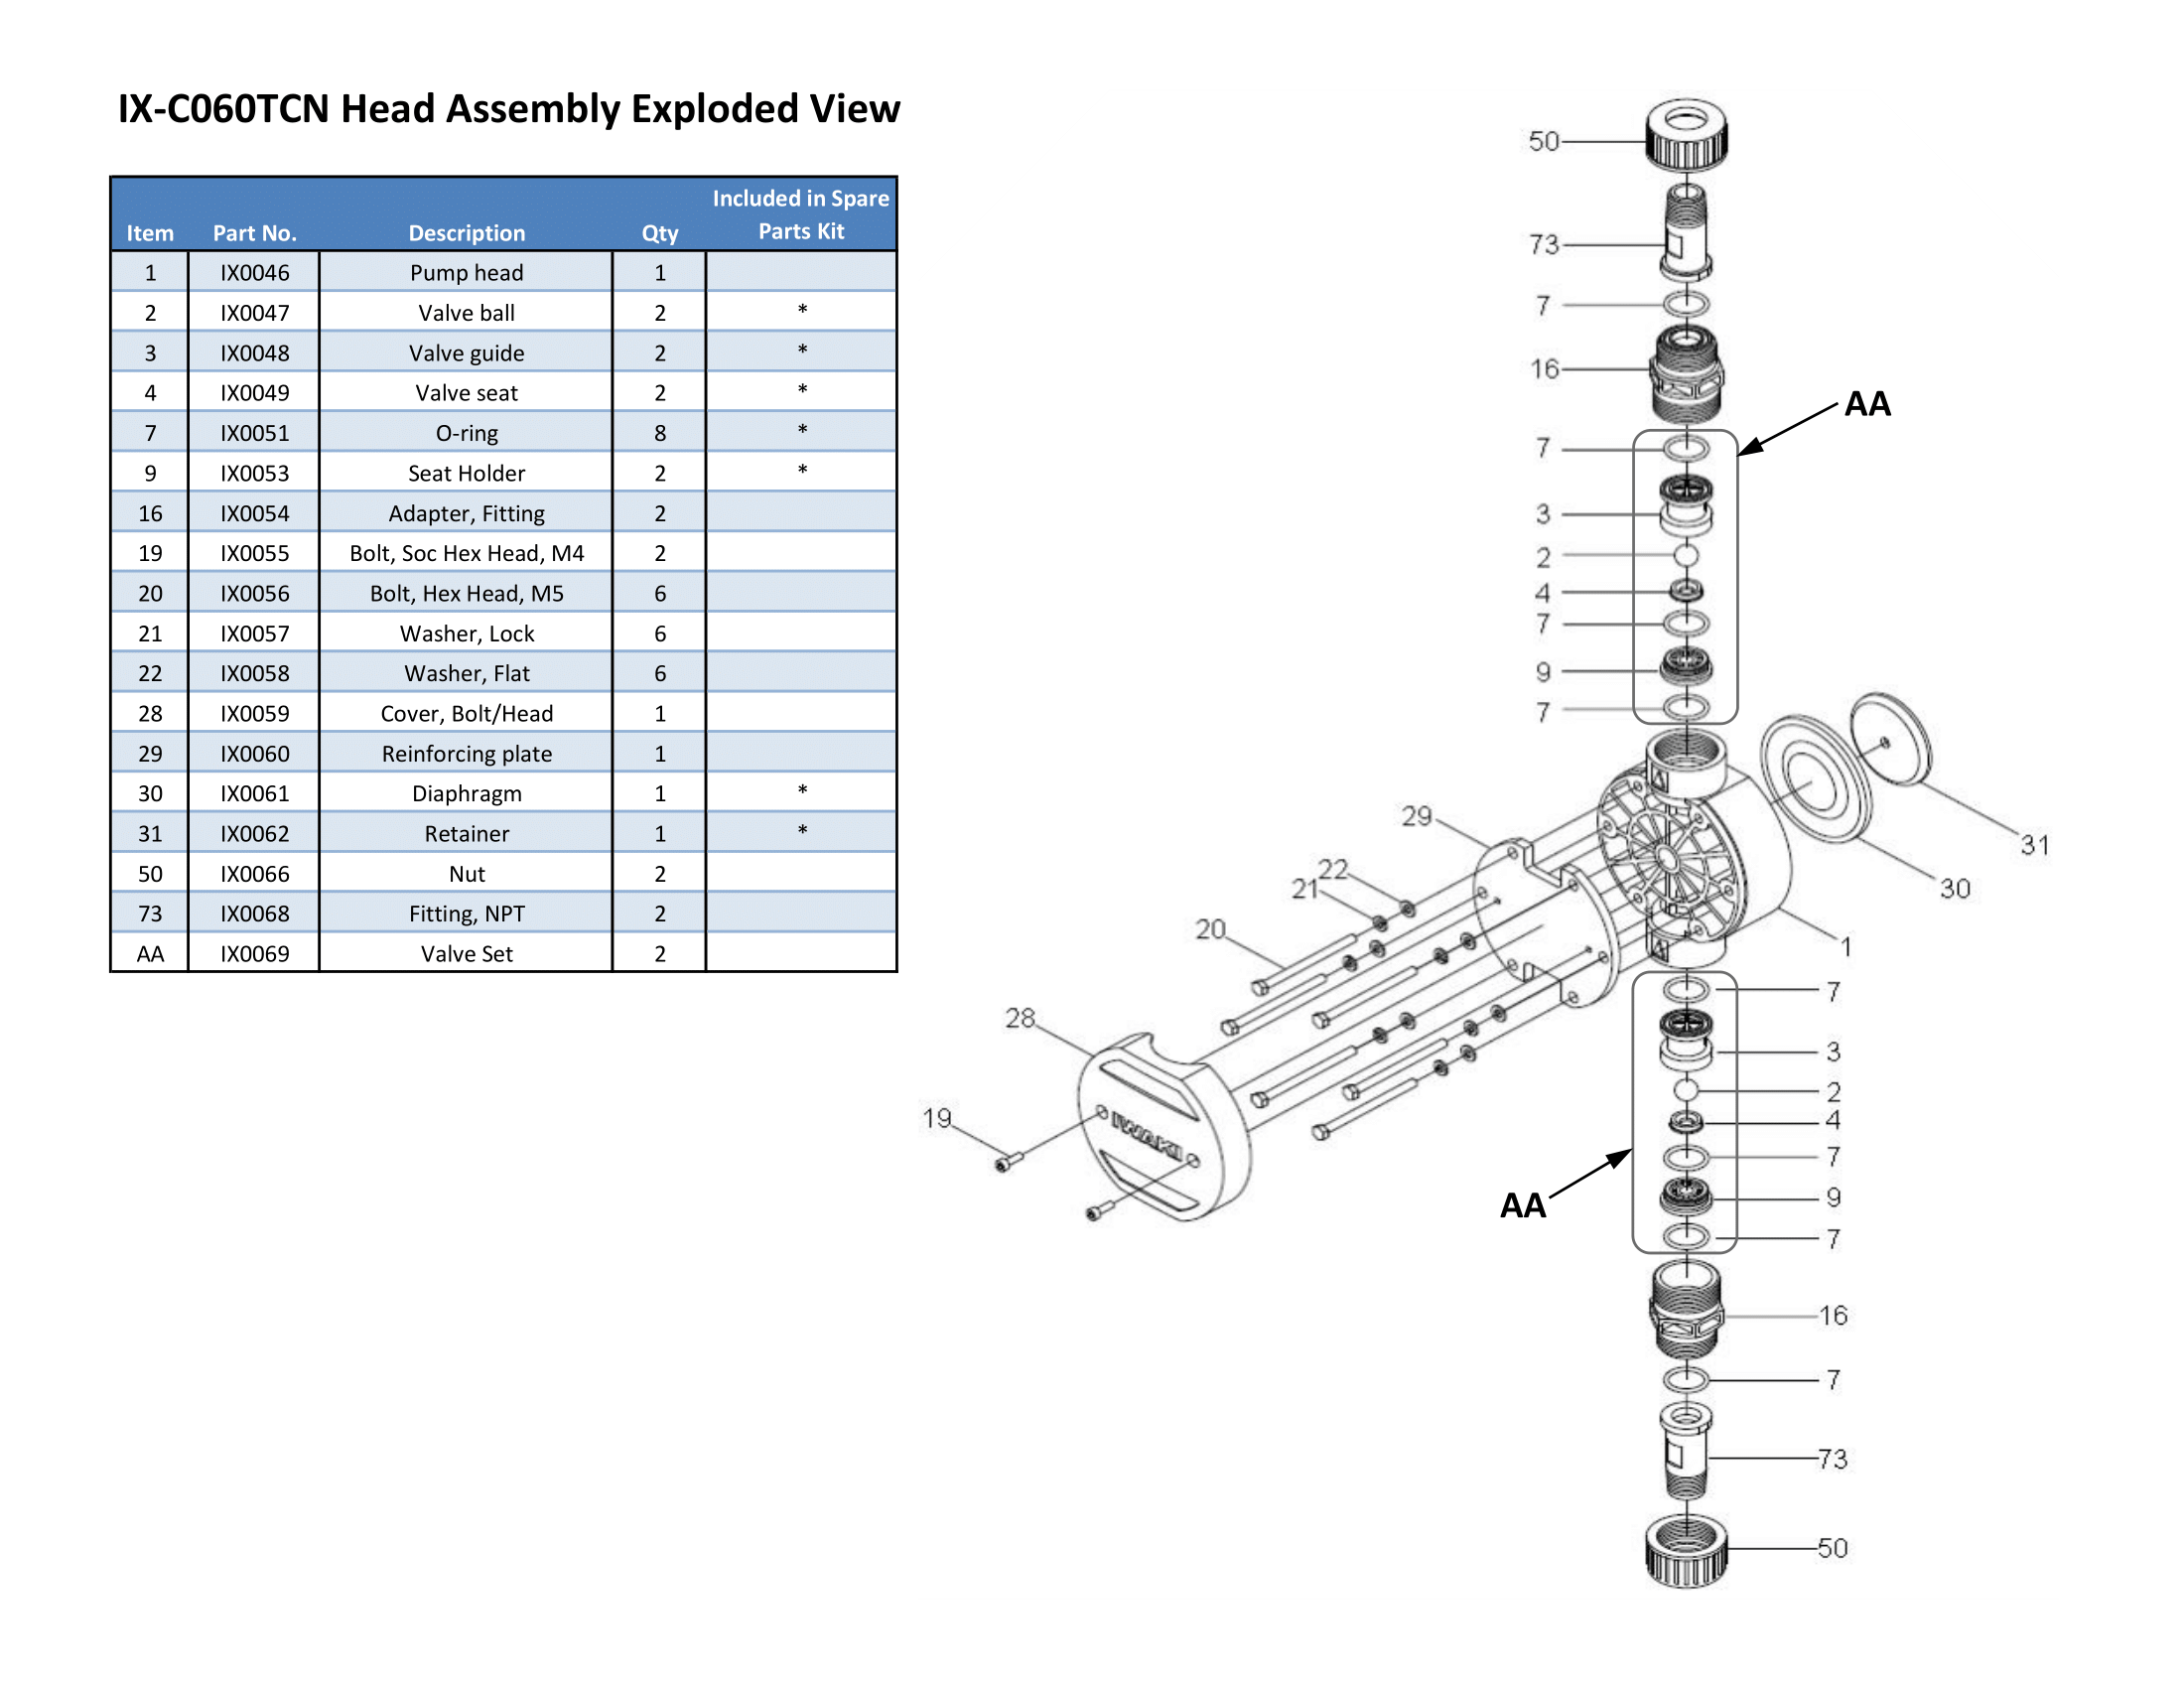 ix-c060tcn-le-exploded-view-with-part-numbers-1.png